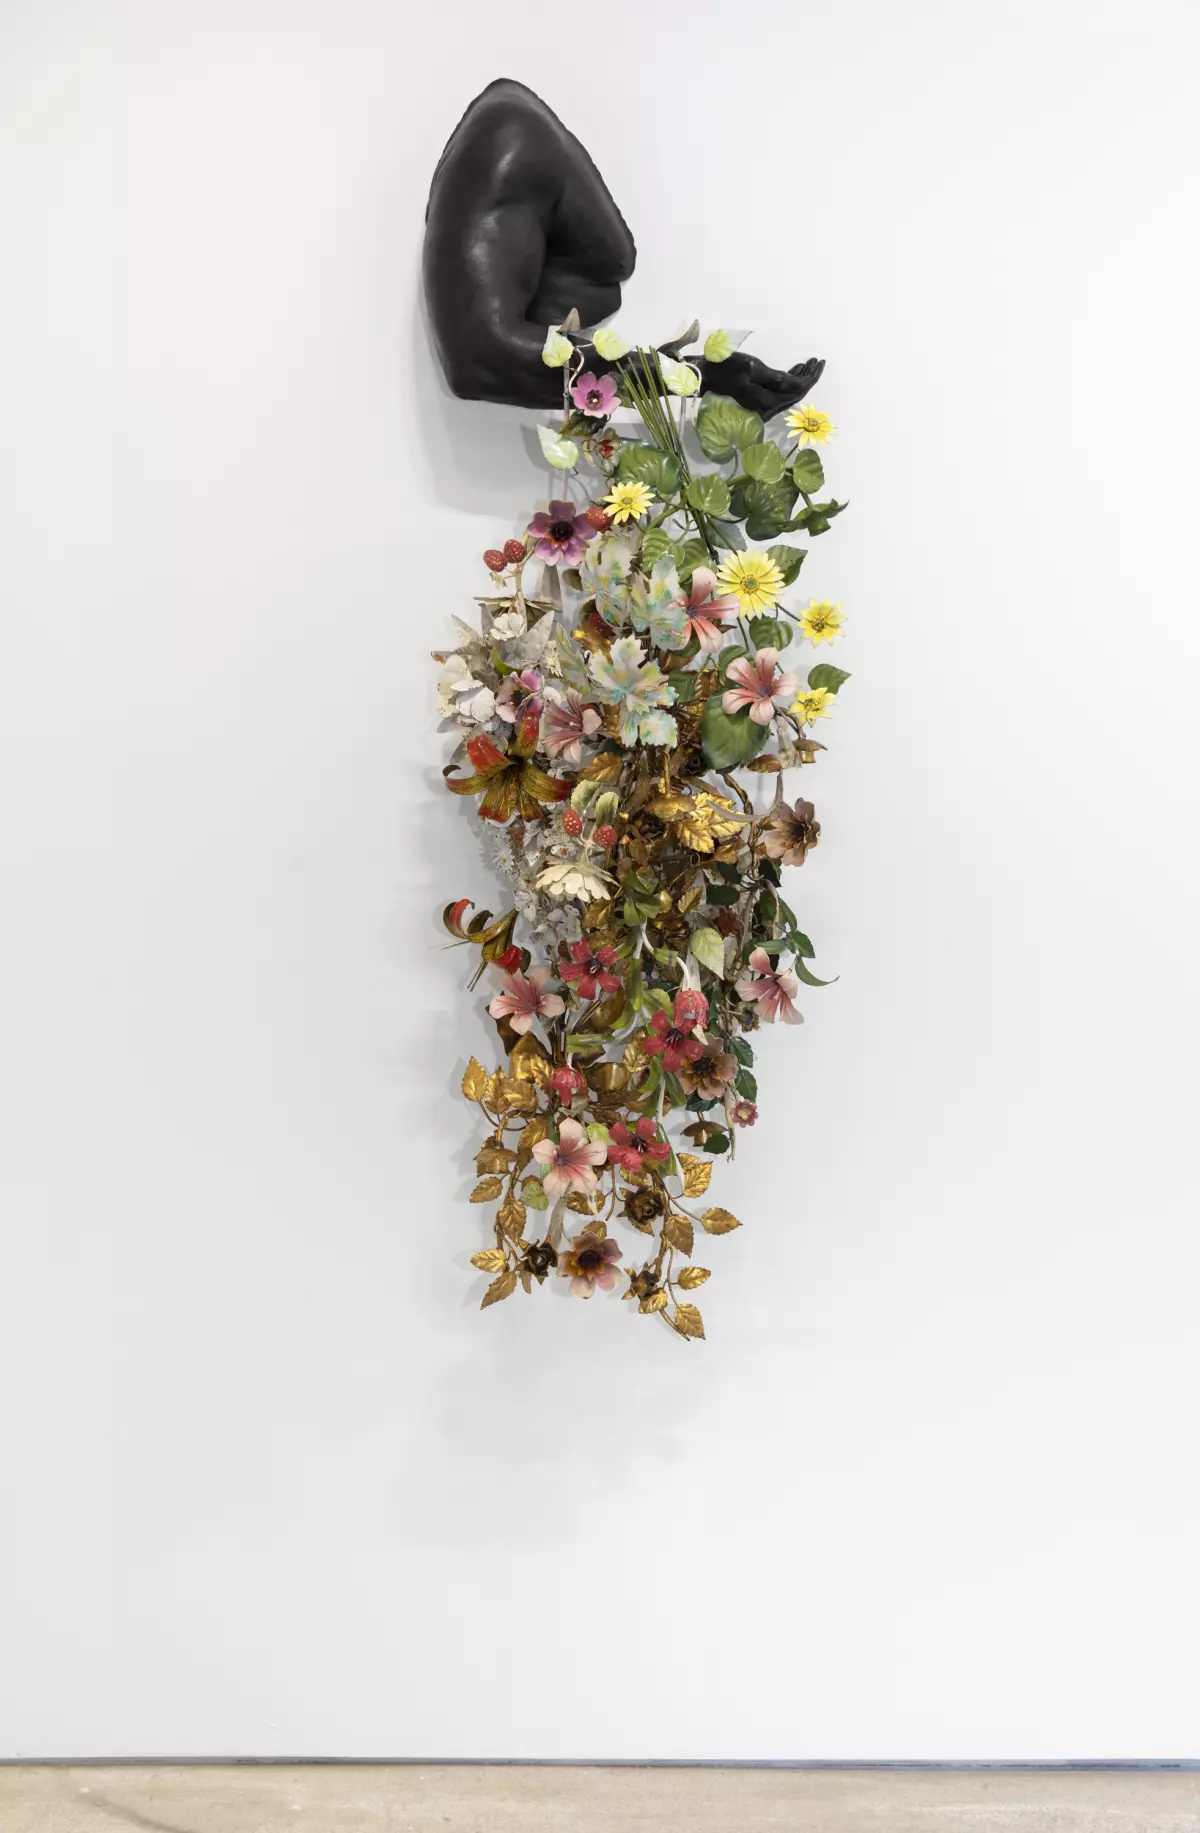 a flowing bouquet of flowers is draped over the sculpture of a man's arm